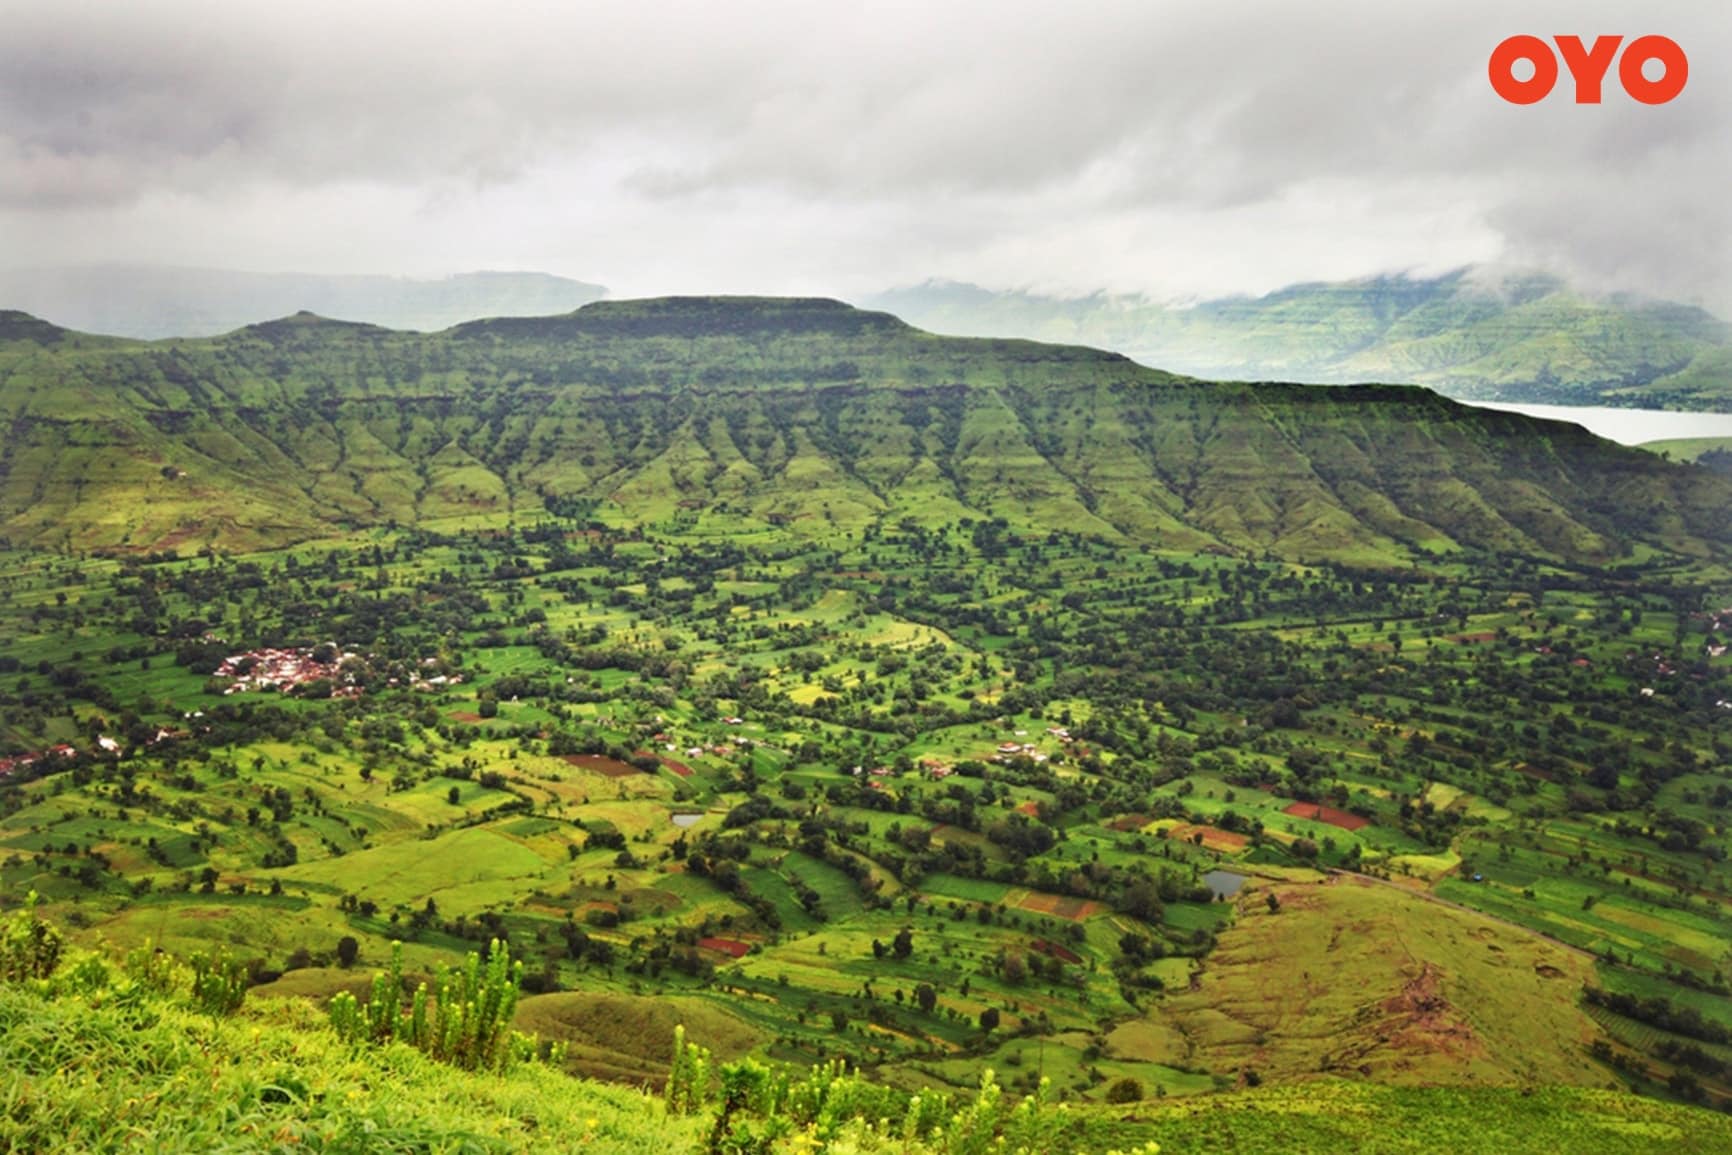 Panchgani - one of the best weekend getaways from Mumbai within 300 kms